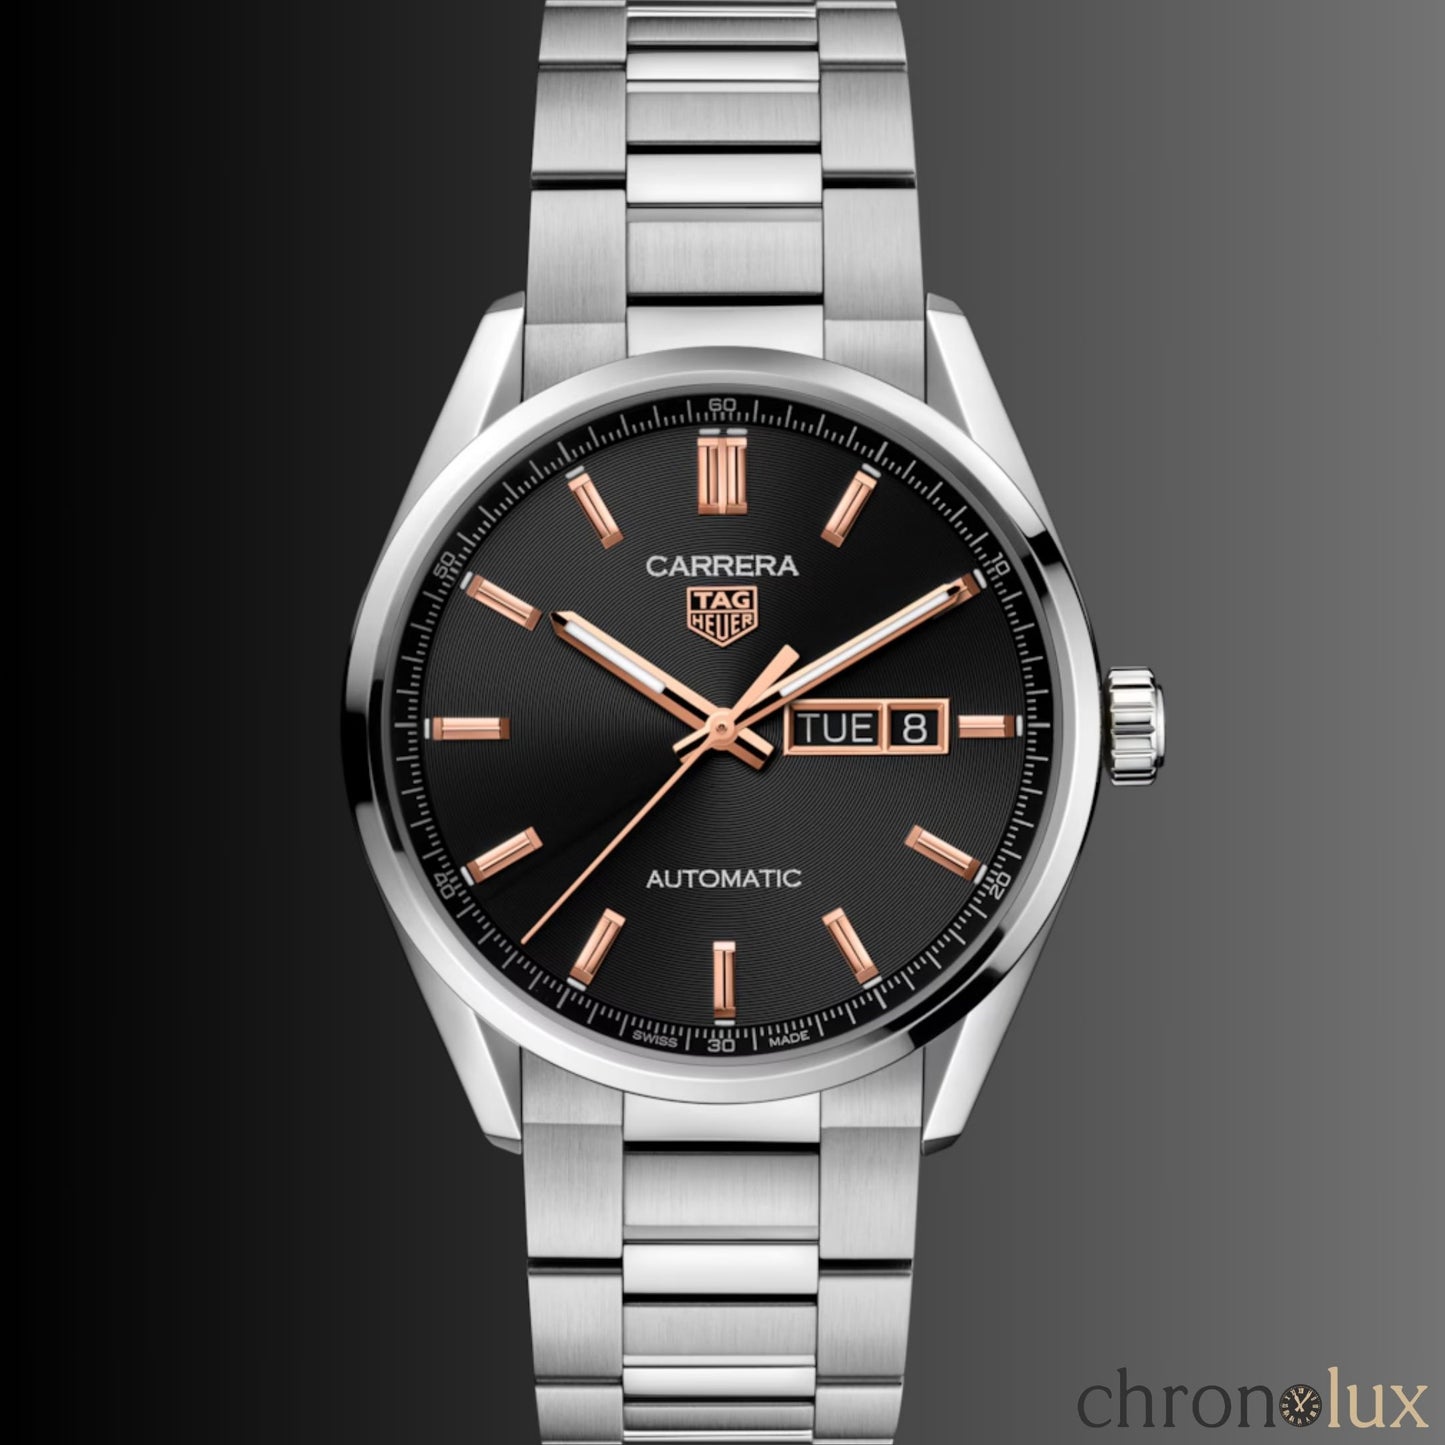 TAG HEUER CARRERA DAY DATE - BLACK/GOLD